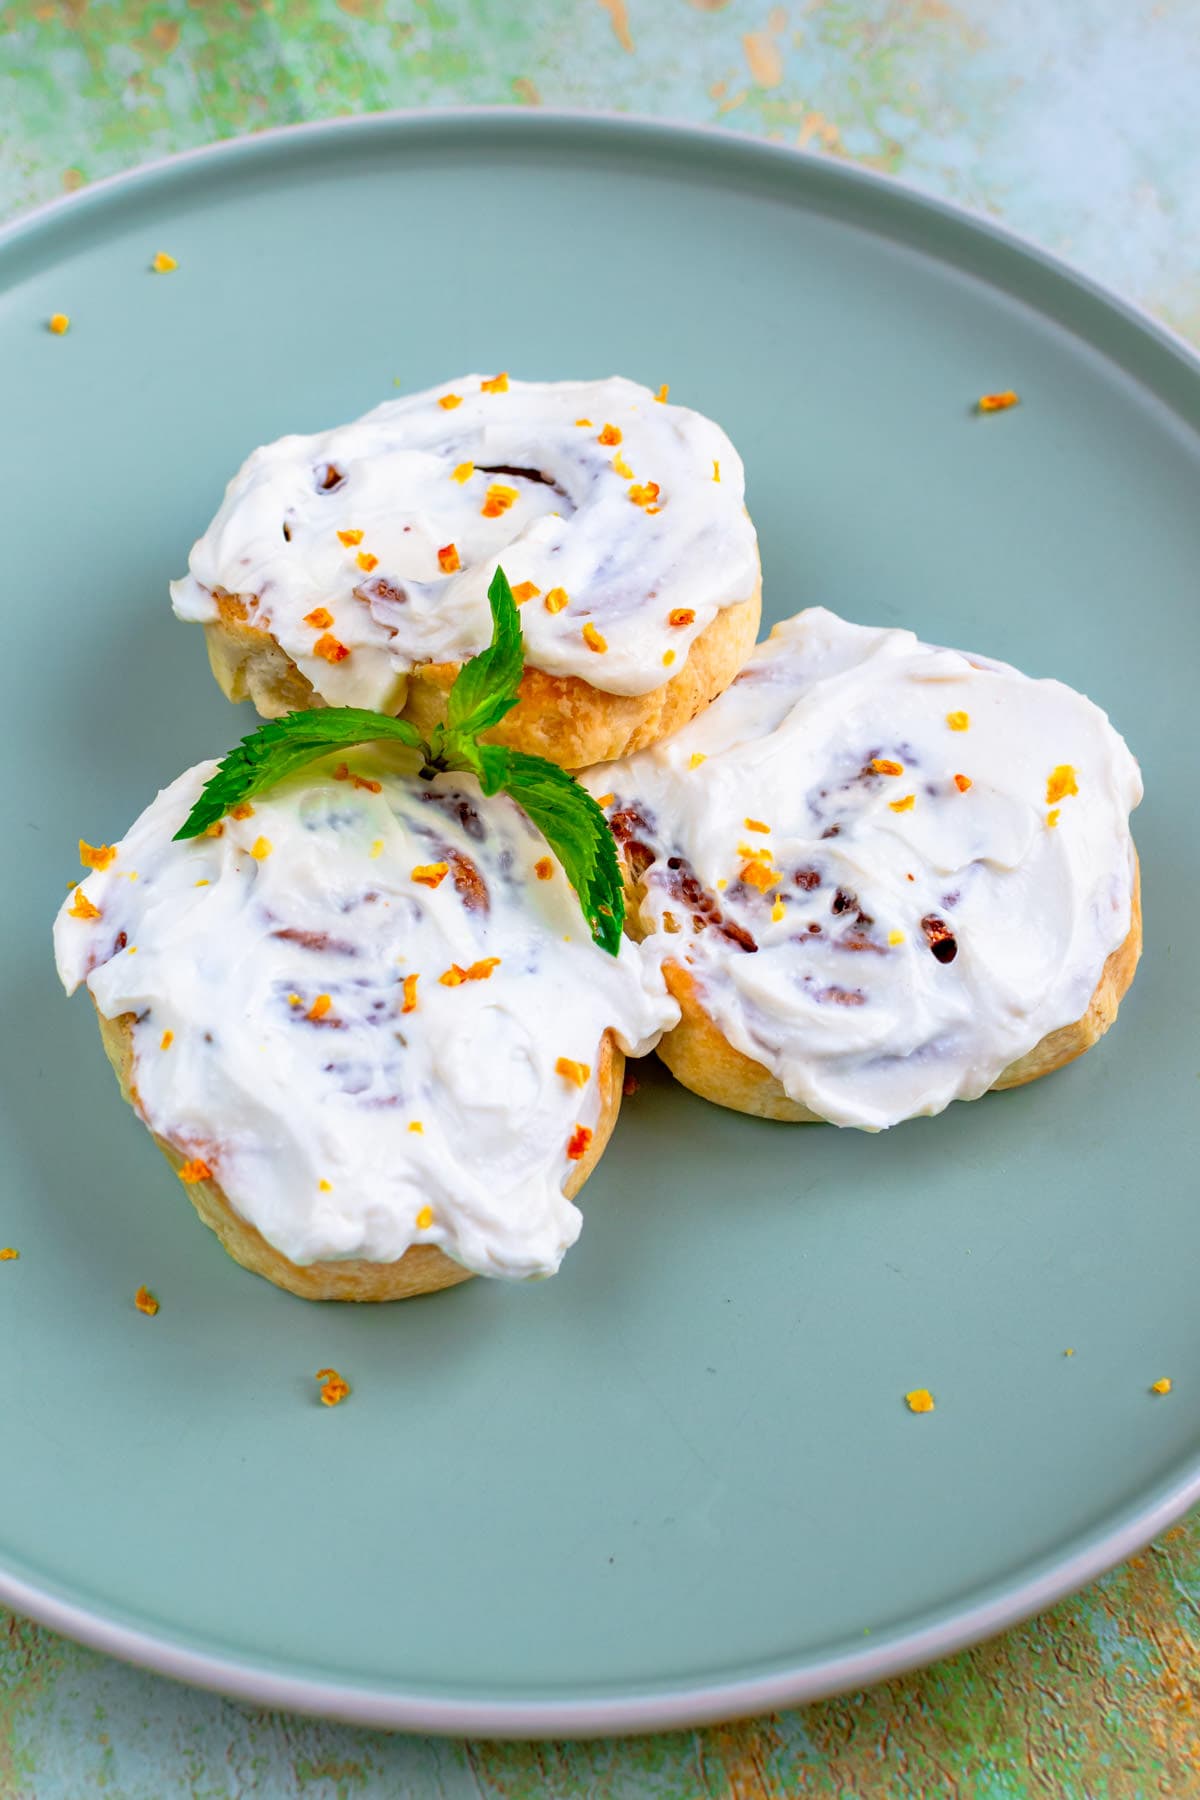 Top view of cinnamon rolls with cream, orange zest and mint leaves.